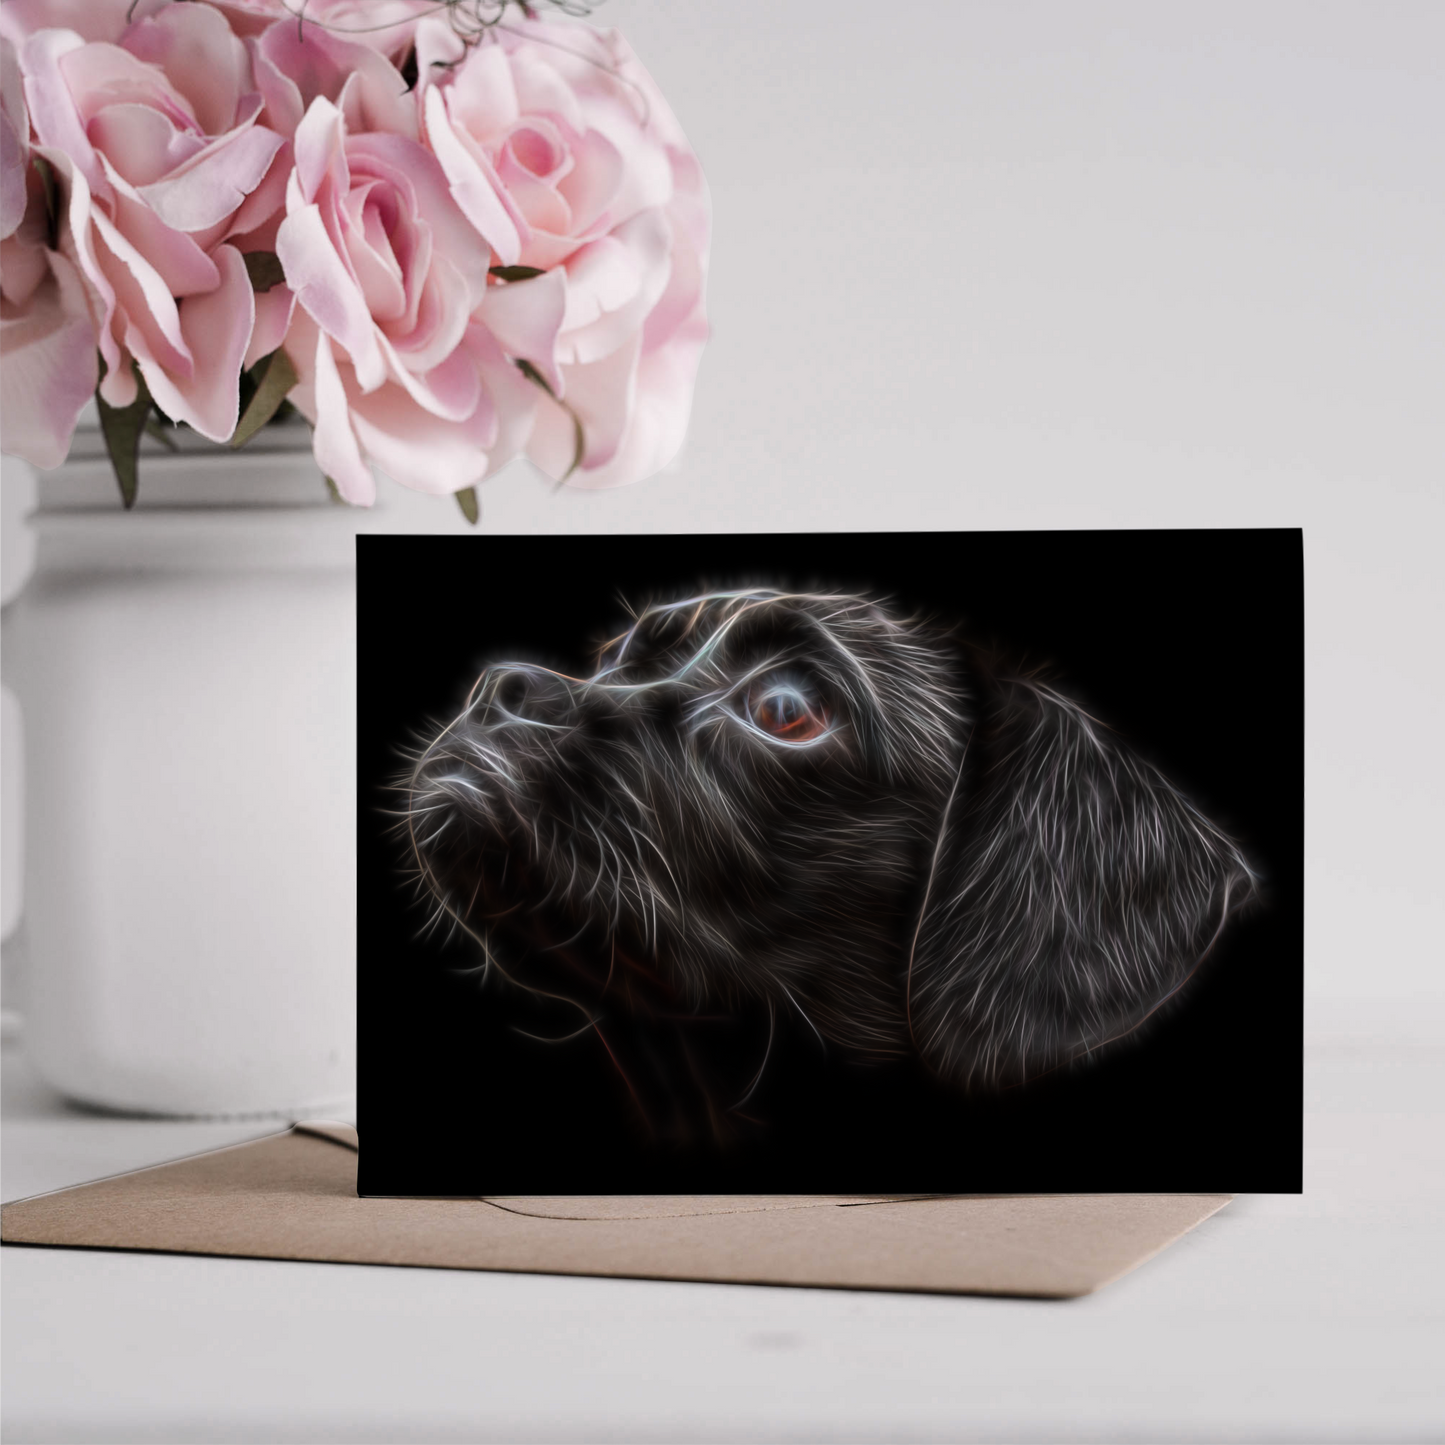 Black Puggle Greeting Card Blank Inside for Birthdays or any other Occasion